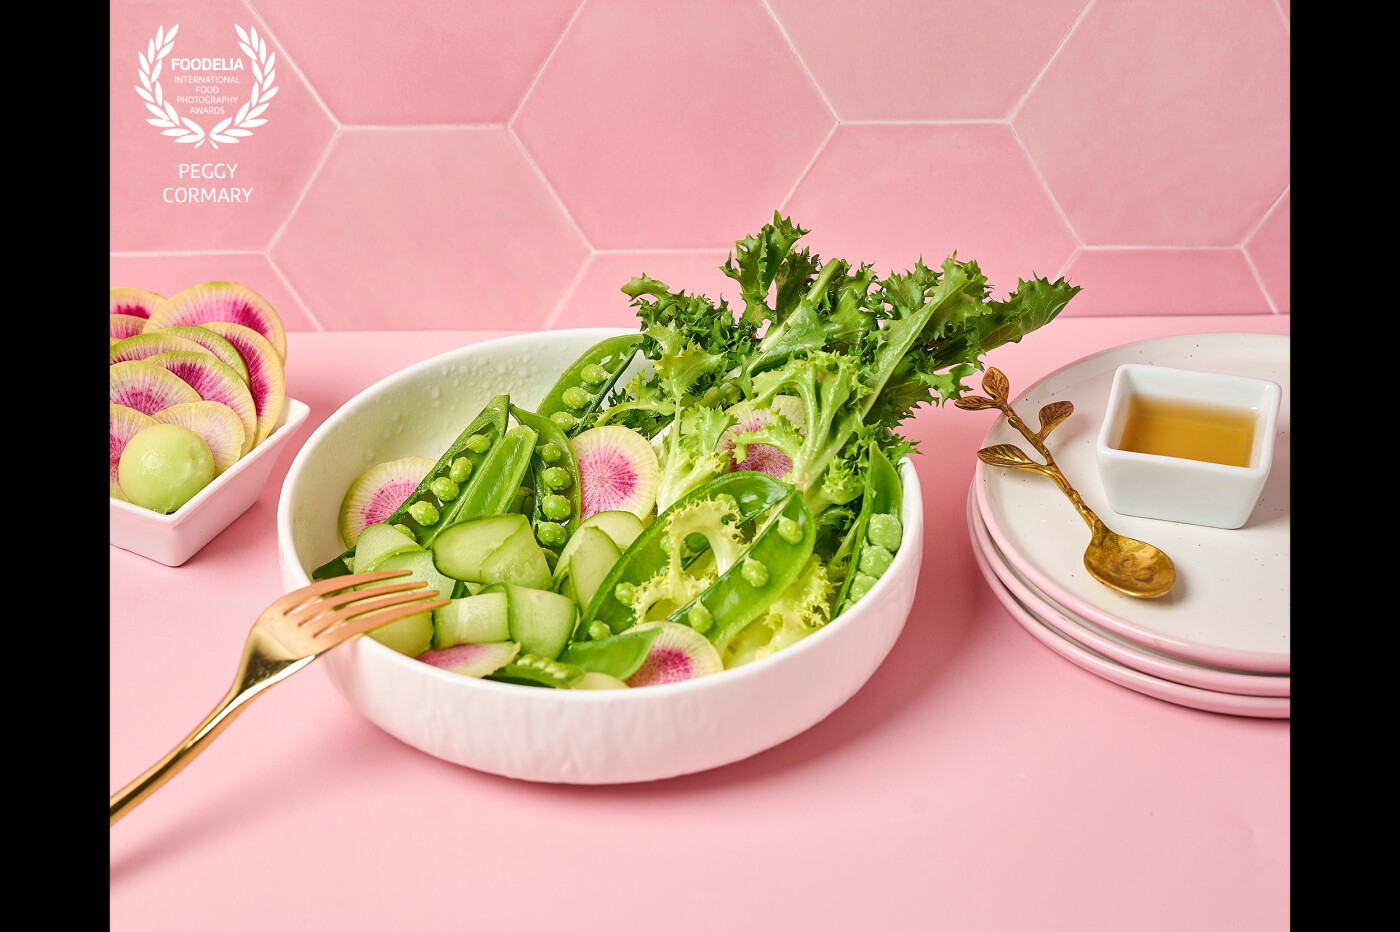 This salad celebrates Spring with a bed of mixed greens that provide a variety of textures and flavors. <br />
The vibrant pink backdrops emphasizes the colors and textures of the salad, making it look even more enticing.